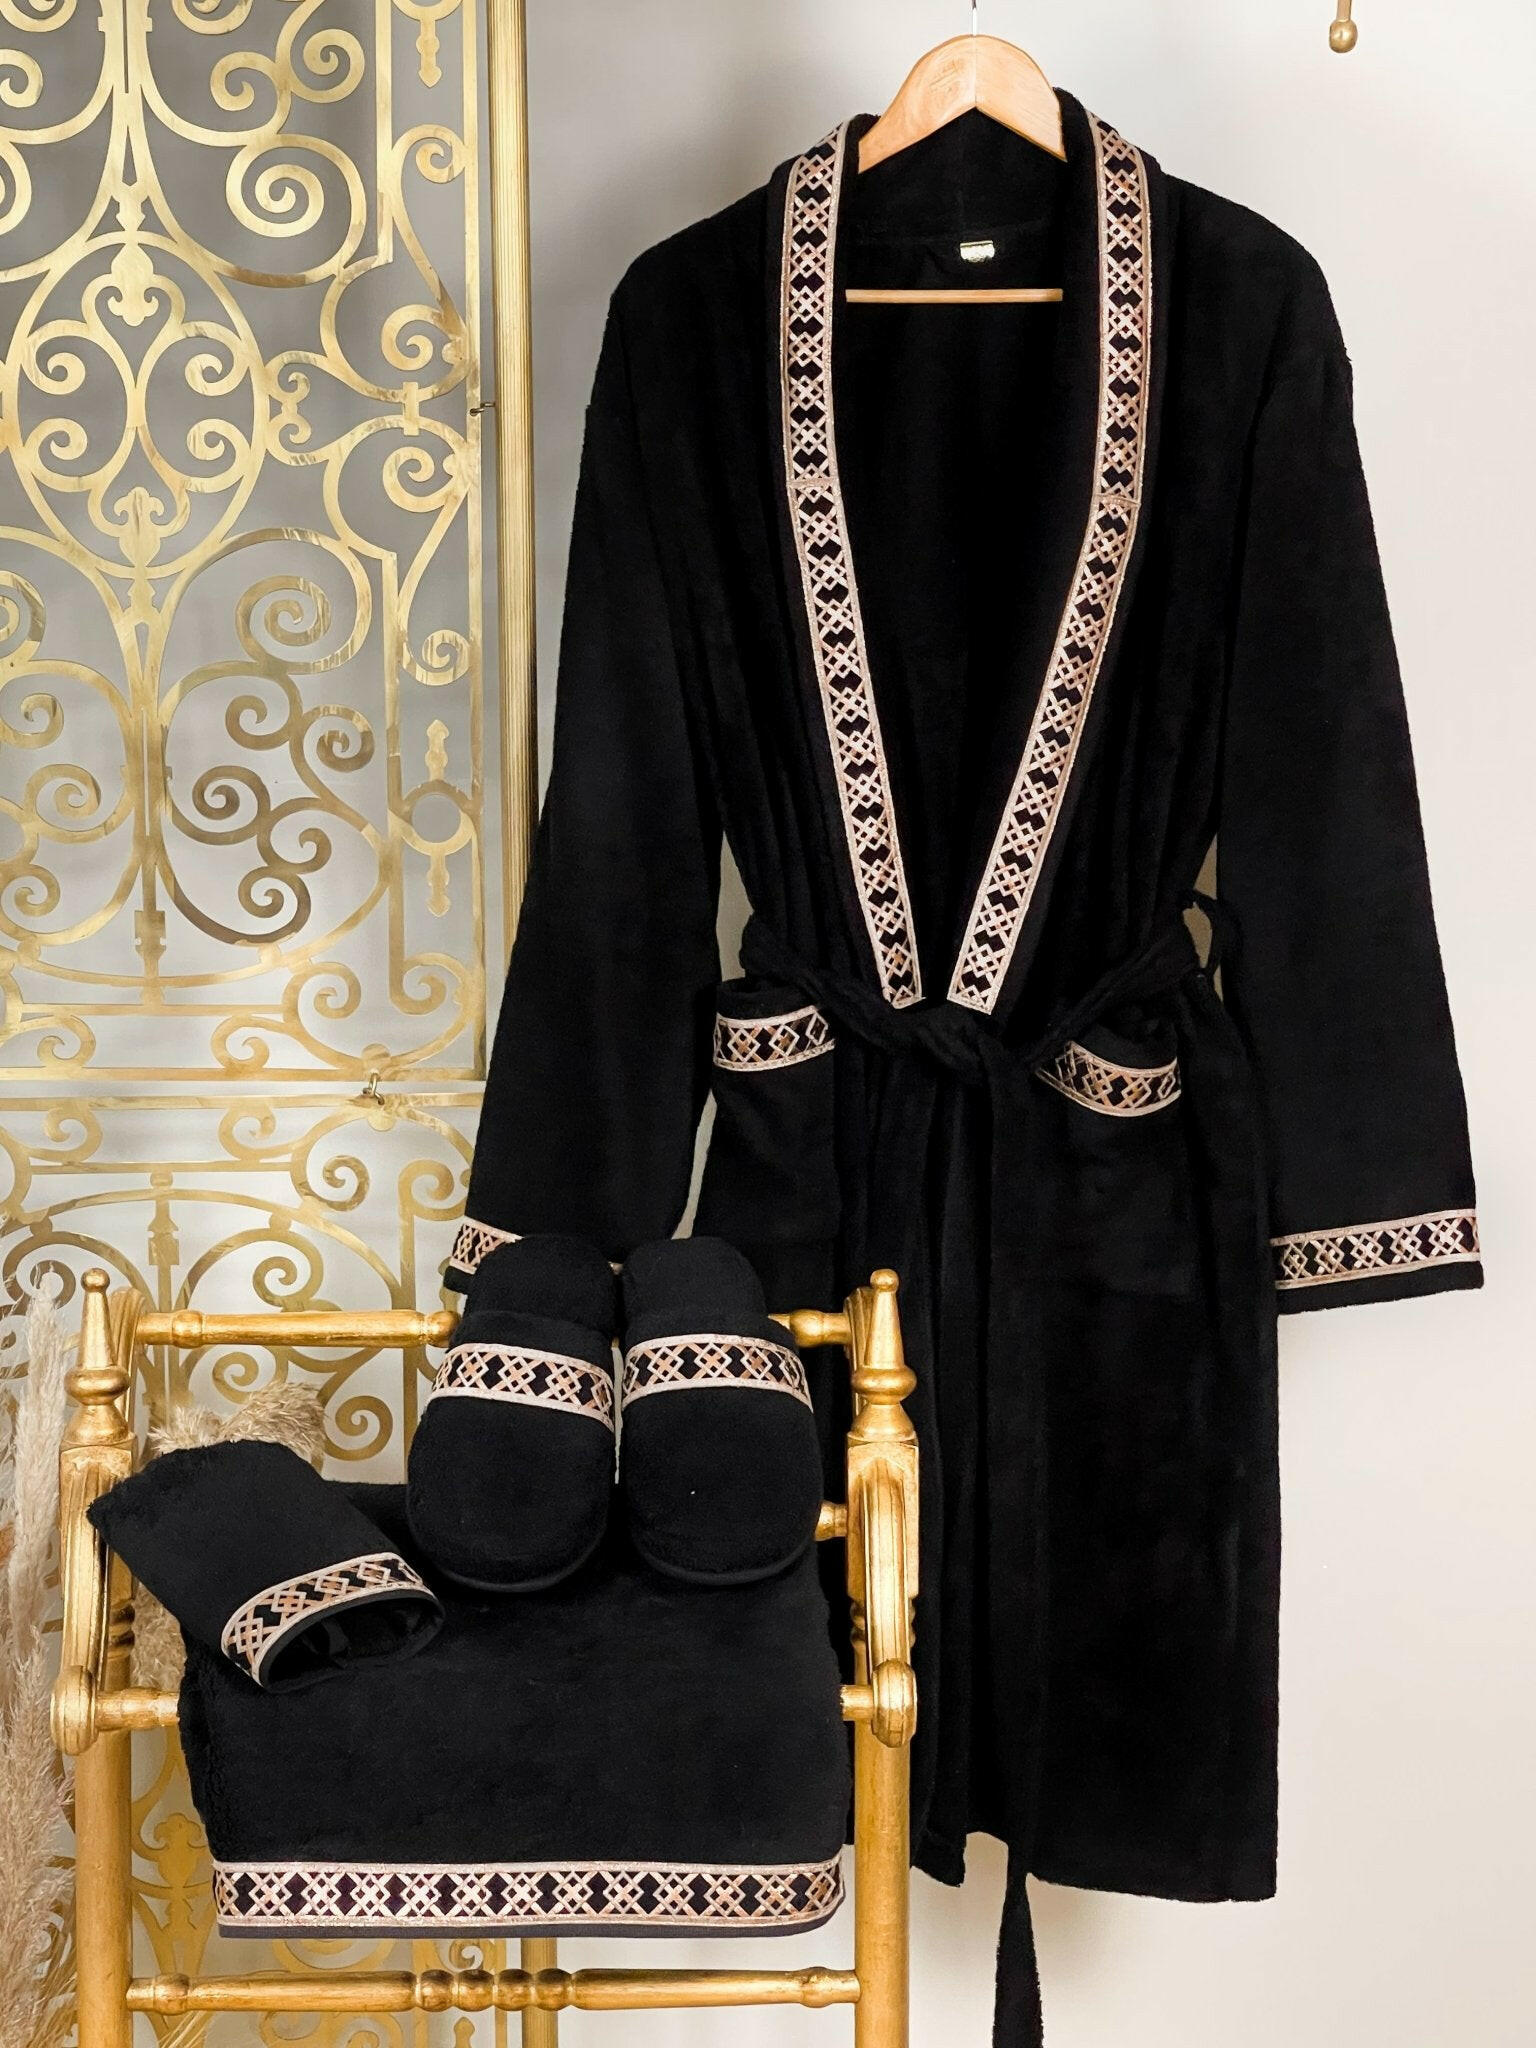 Tara Exclusive Bathrobe (His) - Creative Home Designs, Bathrobes, Men's luxury design robe with copper laser cut Celtic style patterned dressing 